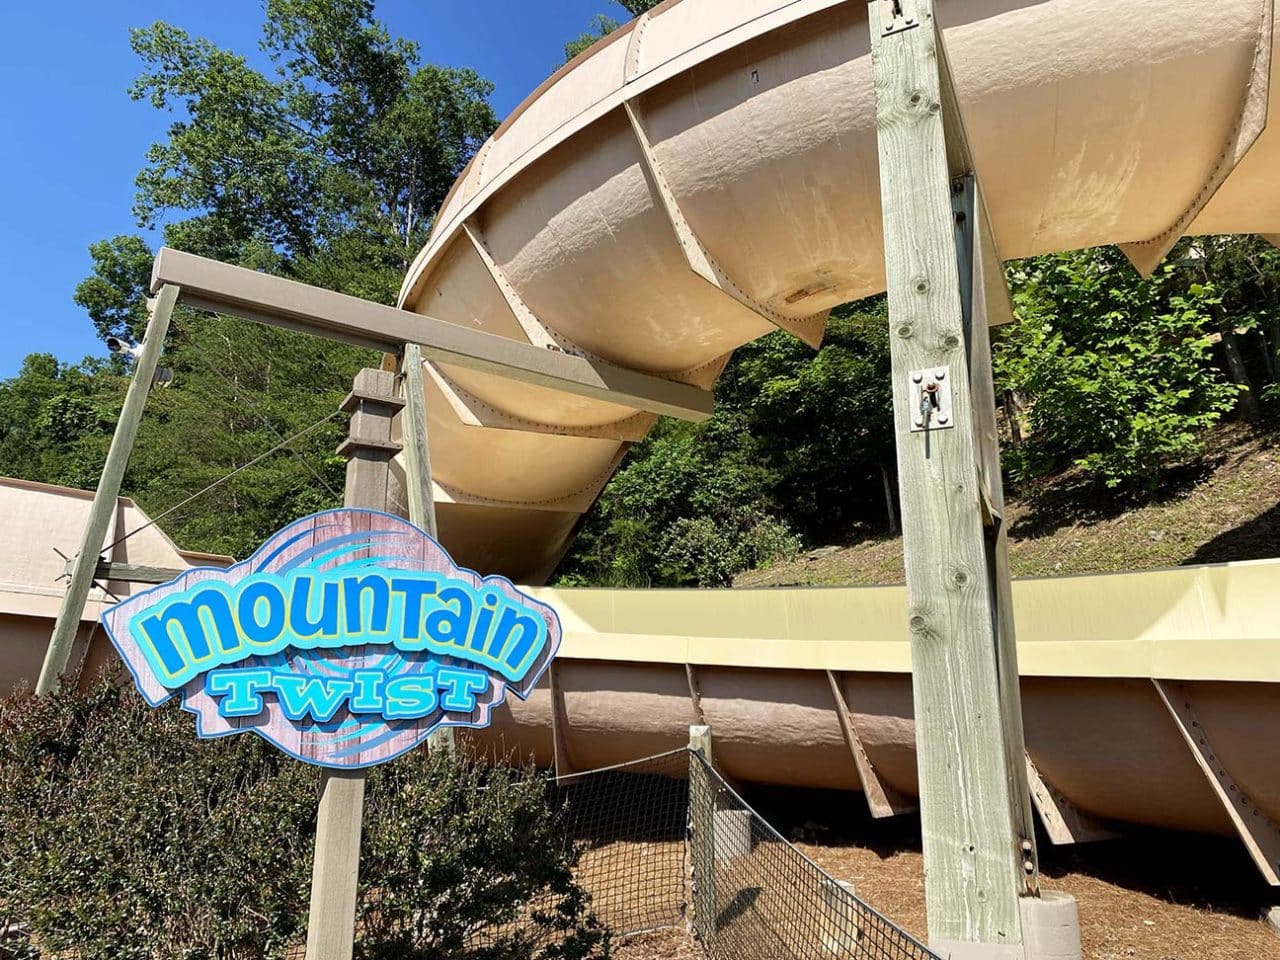 Best Things to do at Dollywood: There are plenty of Slides to meet all thrill levels at Dollywood Splash Country